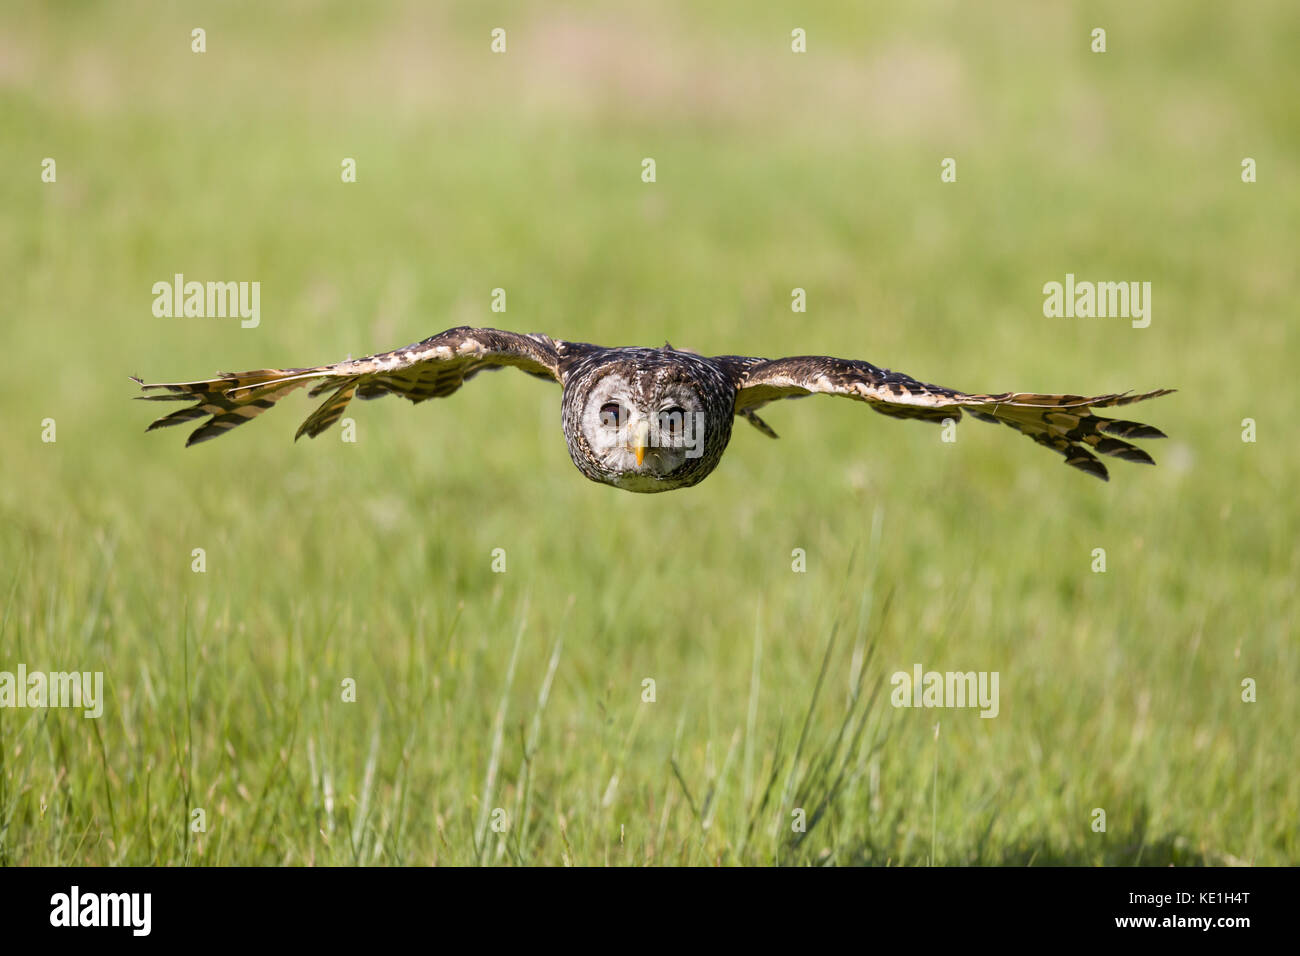 South American Chaco owl flying low over grasslands Stock Photo